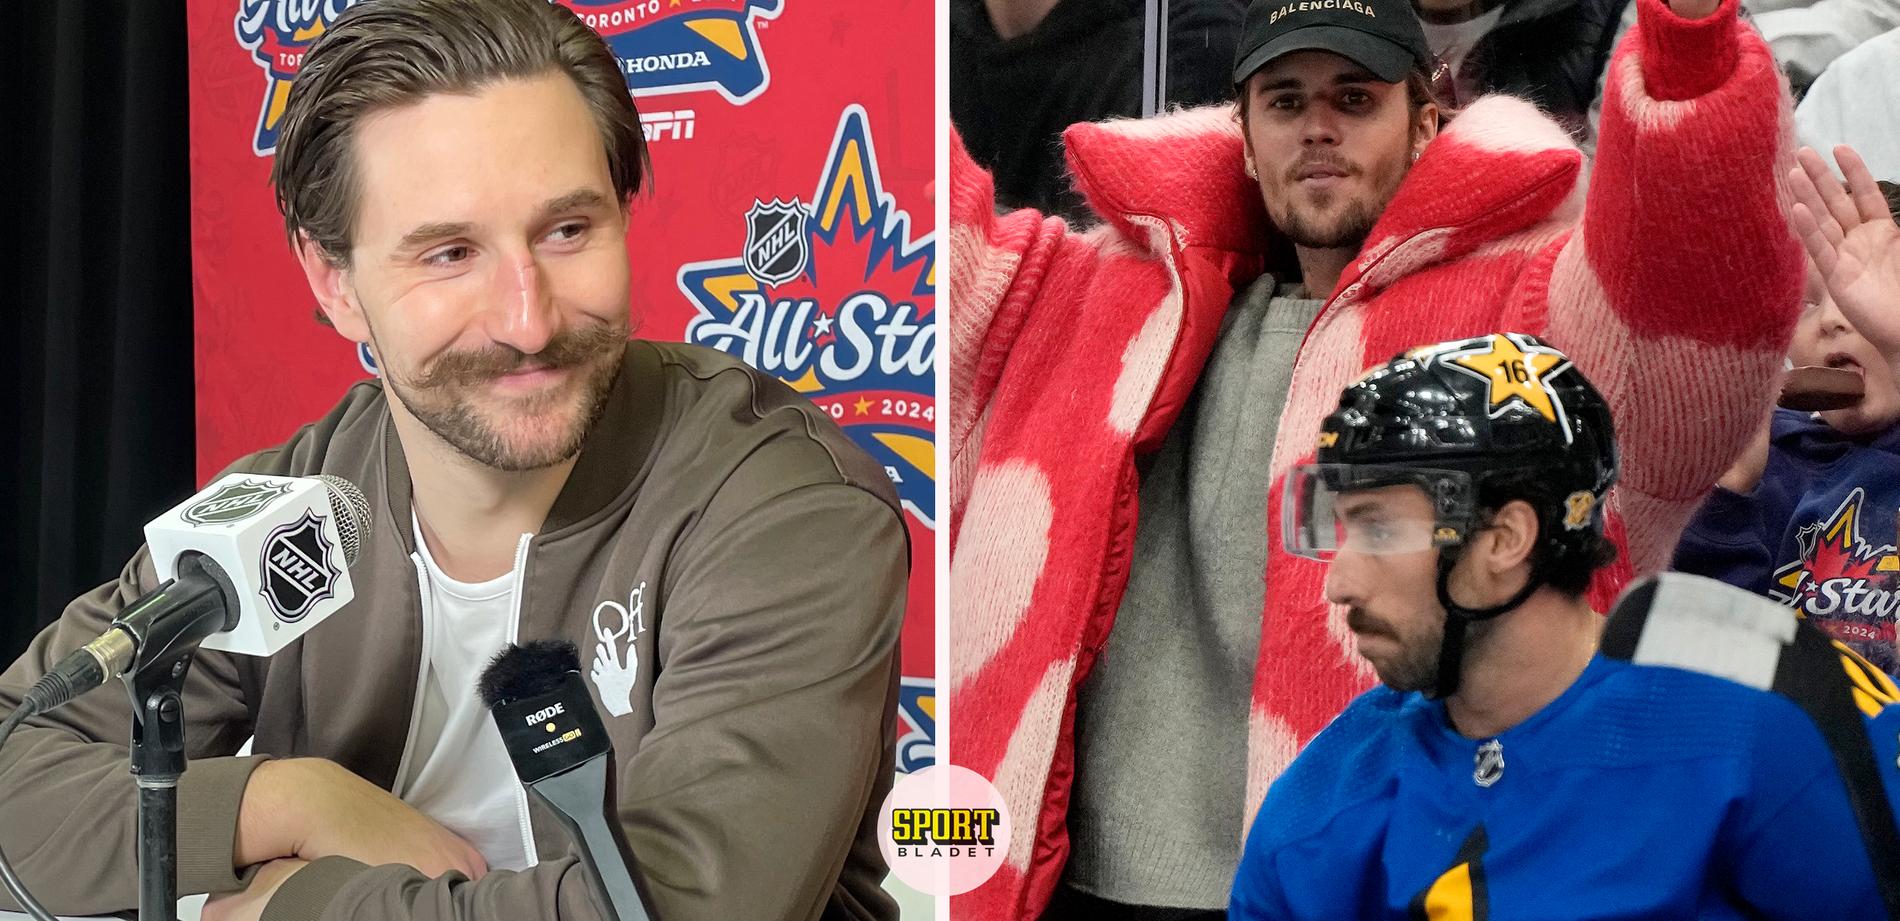 Filip Forsberg Named MVP and Bonds with Justin Bieber at NHL All Star Game in Toronto